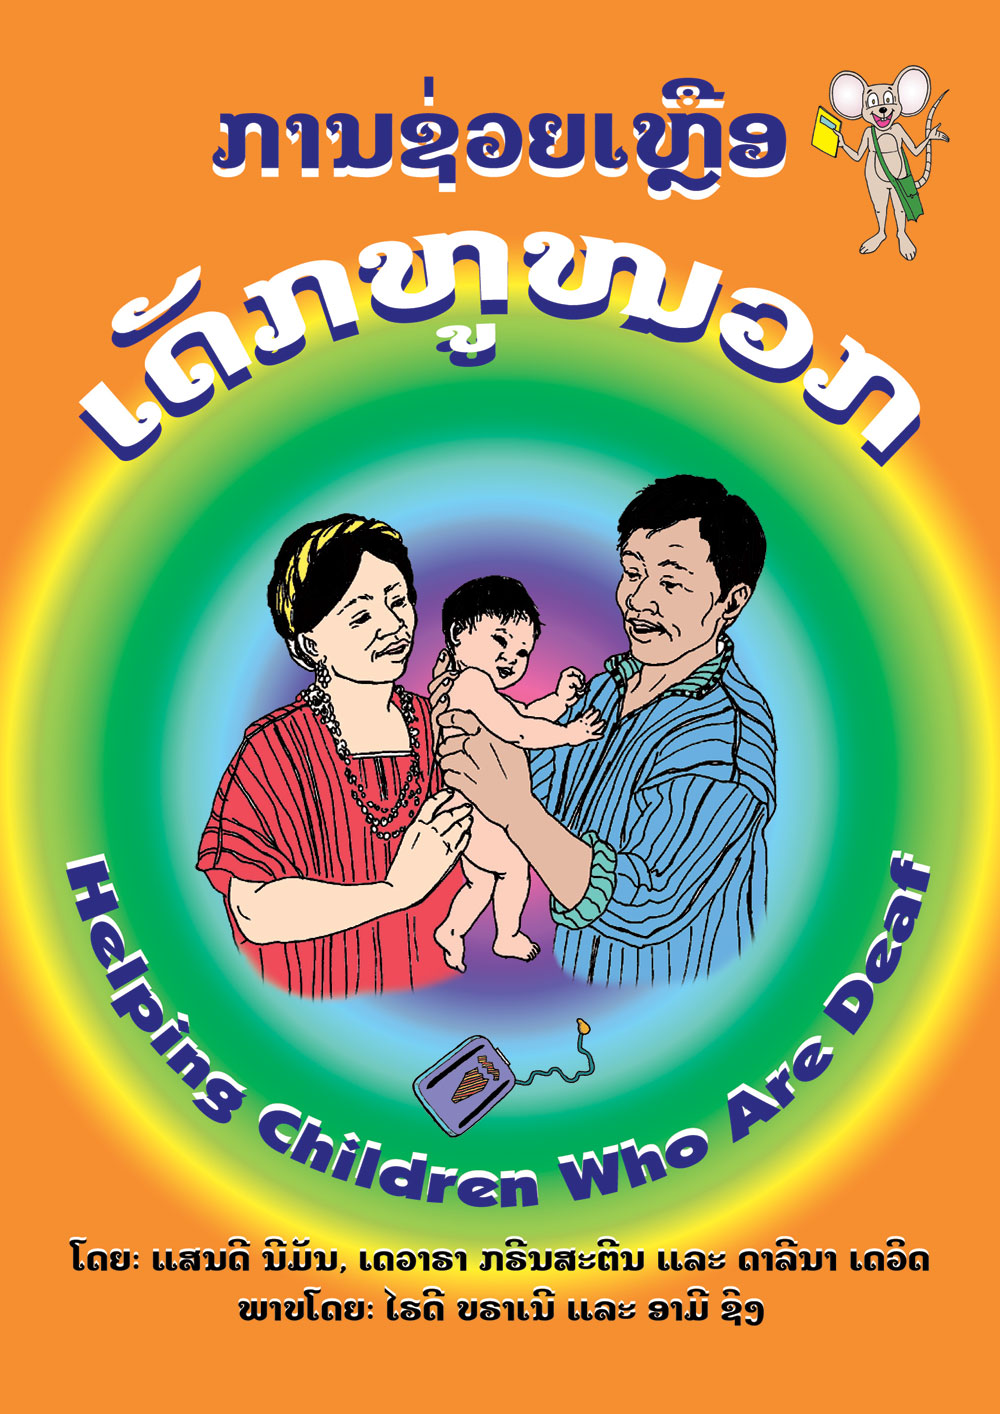 Helping Children Who Are Deaf large book cover, published in Lao language